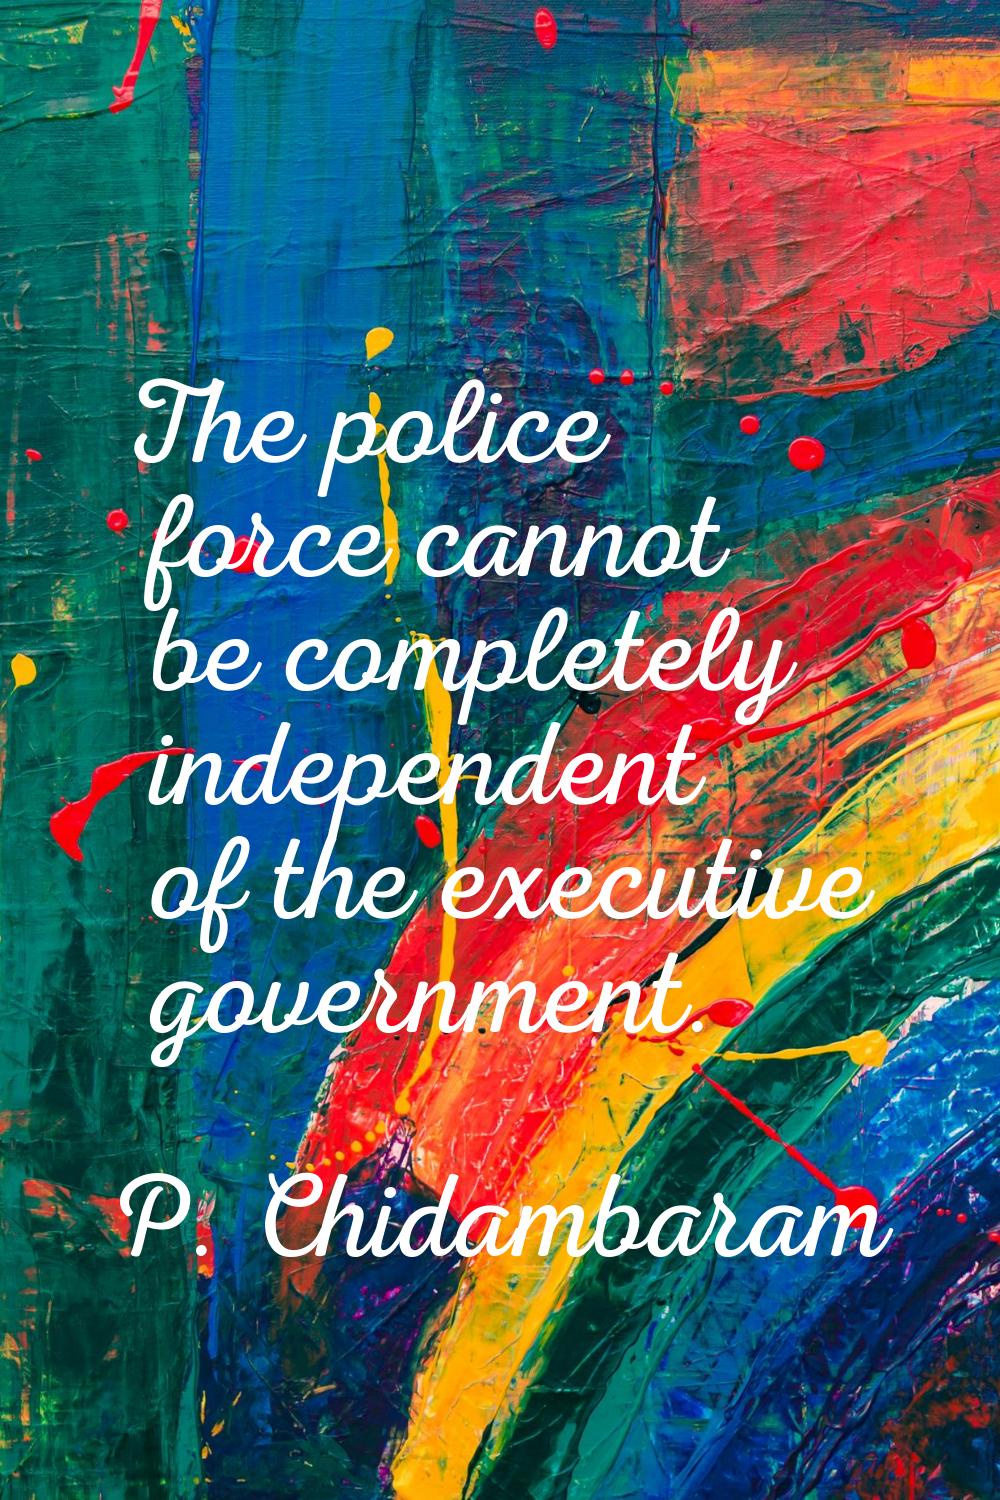 The police force cannot be completely independent of the executive government.